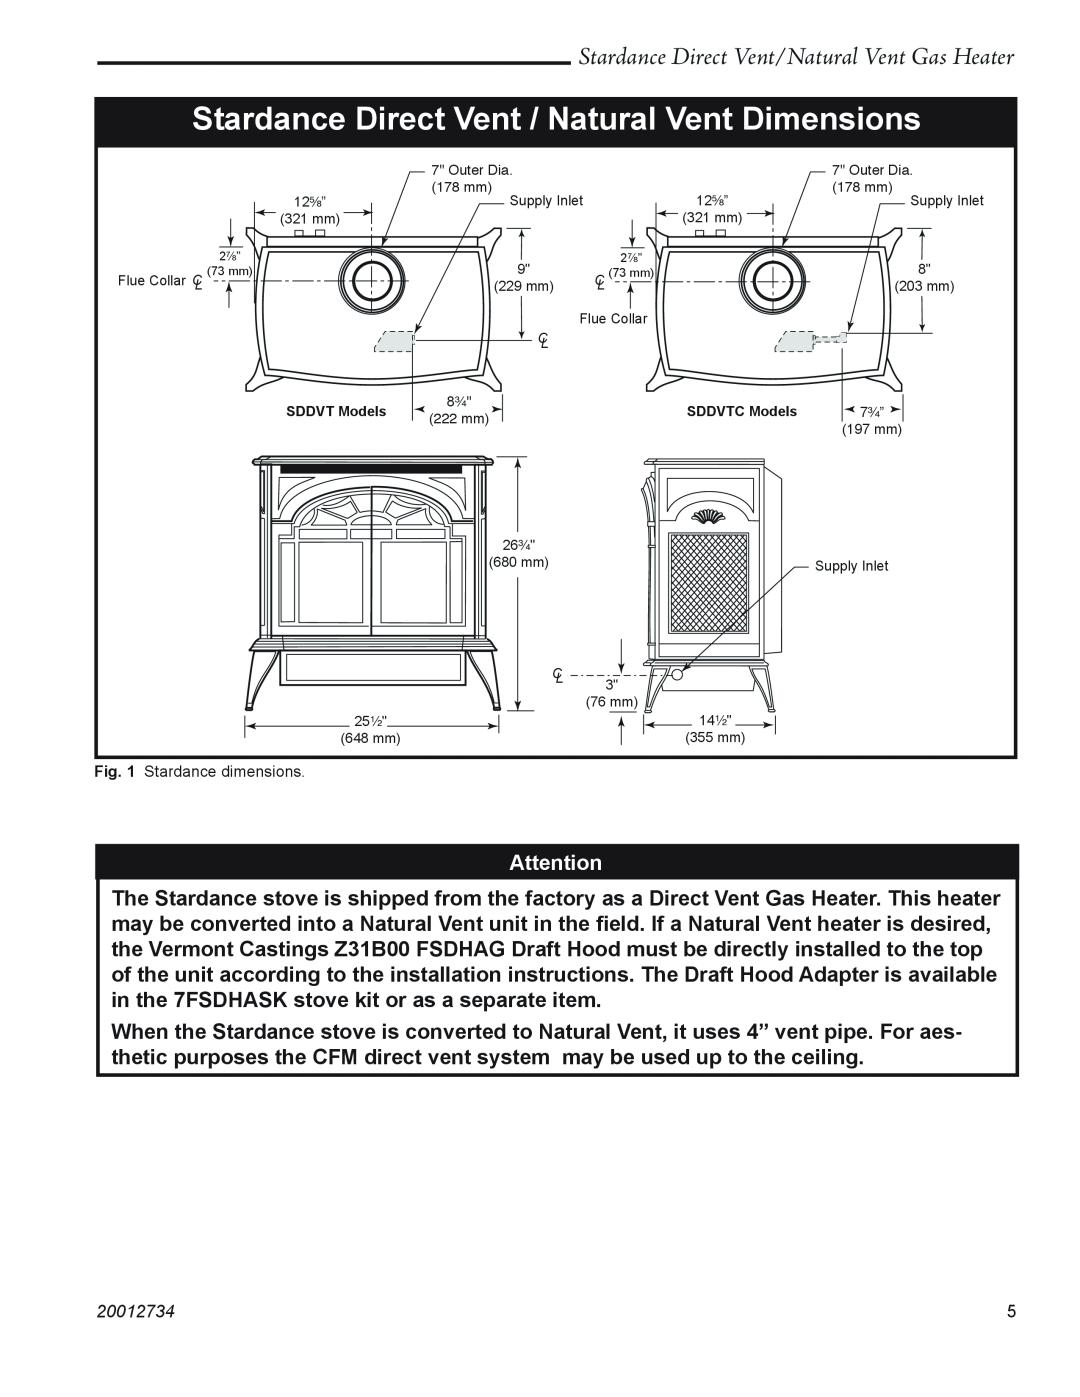 Vermont Casting SDDVT manual Stardance Direct Vent / Natural Vent Dimensions, Stardance Direct Vent/Natural Vent Gas Heater 